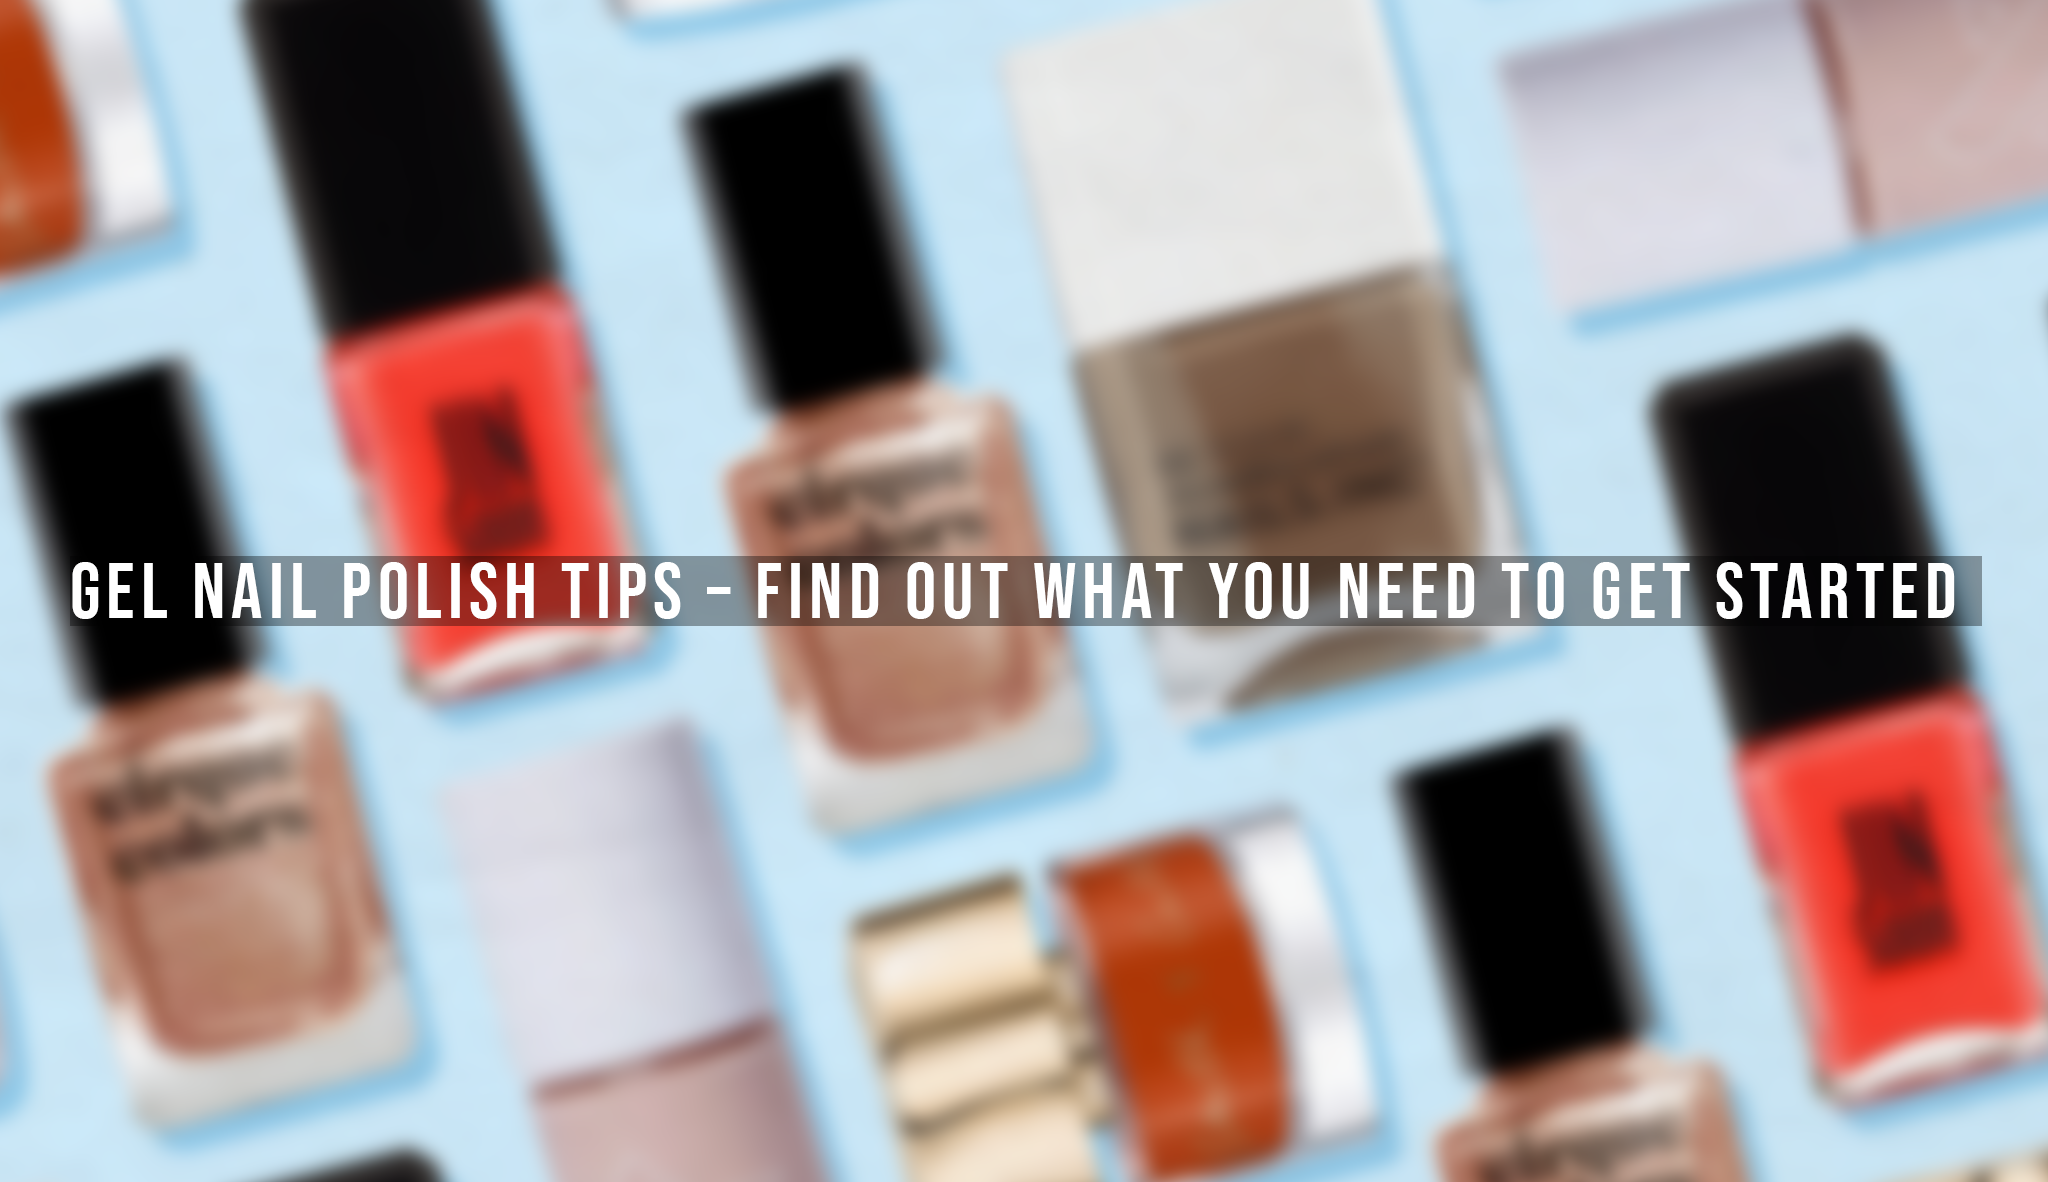 Gel Nail Polish Tips - Find Out What You Need to Get Started